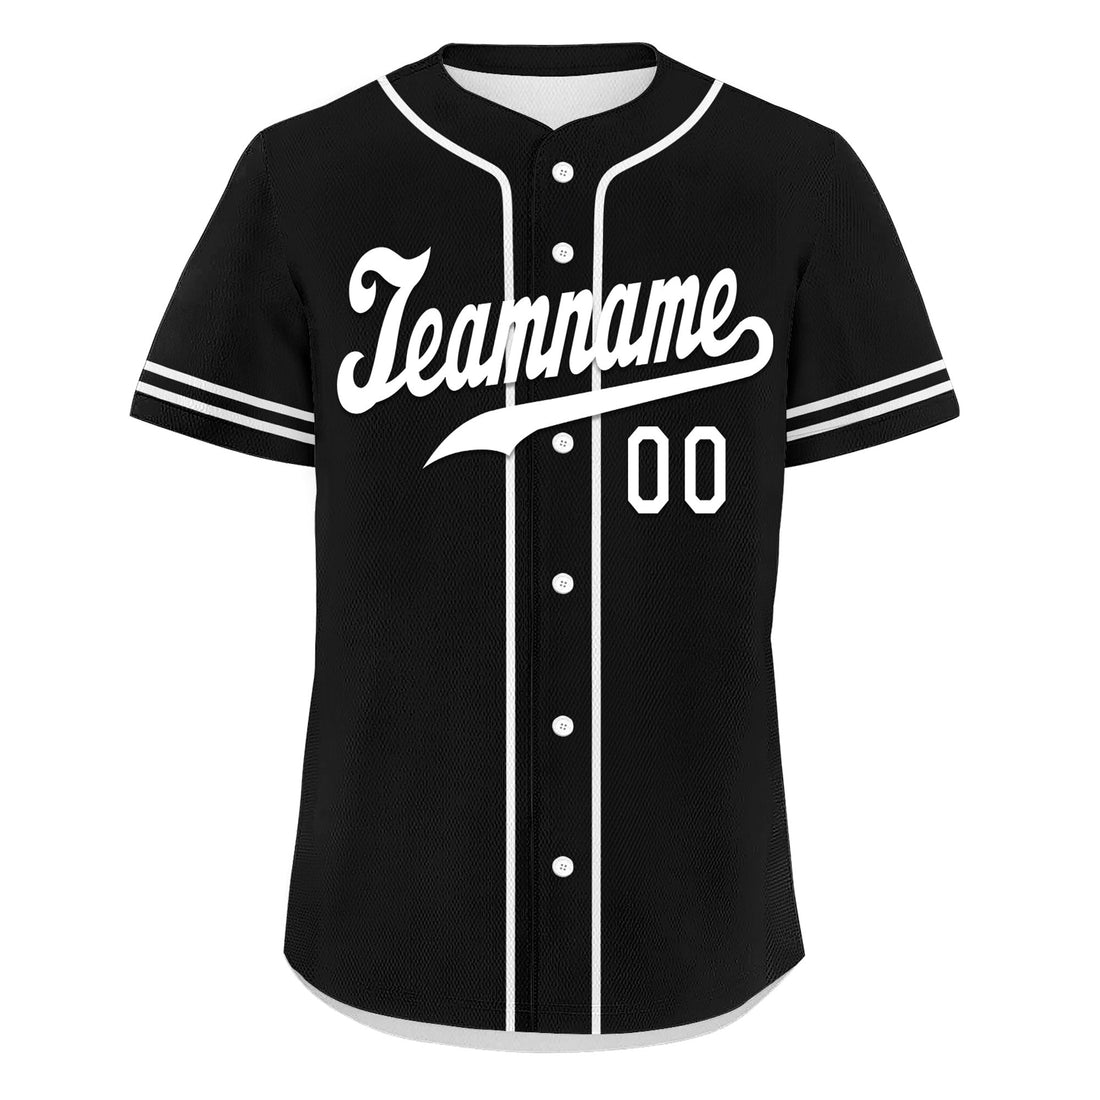 Custom Black Classic Style White Personalized Authentic Baseball Jersey UN002-bd0b00d8-ca